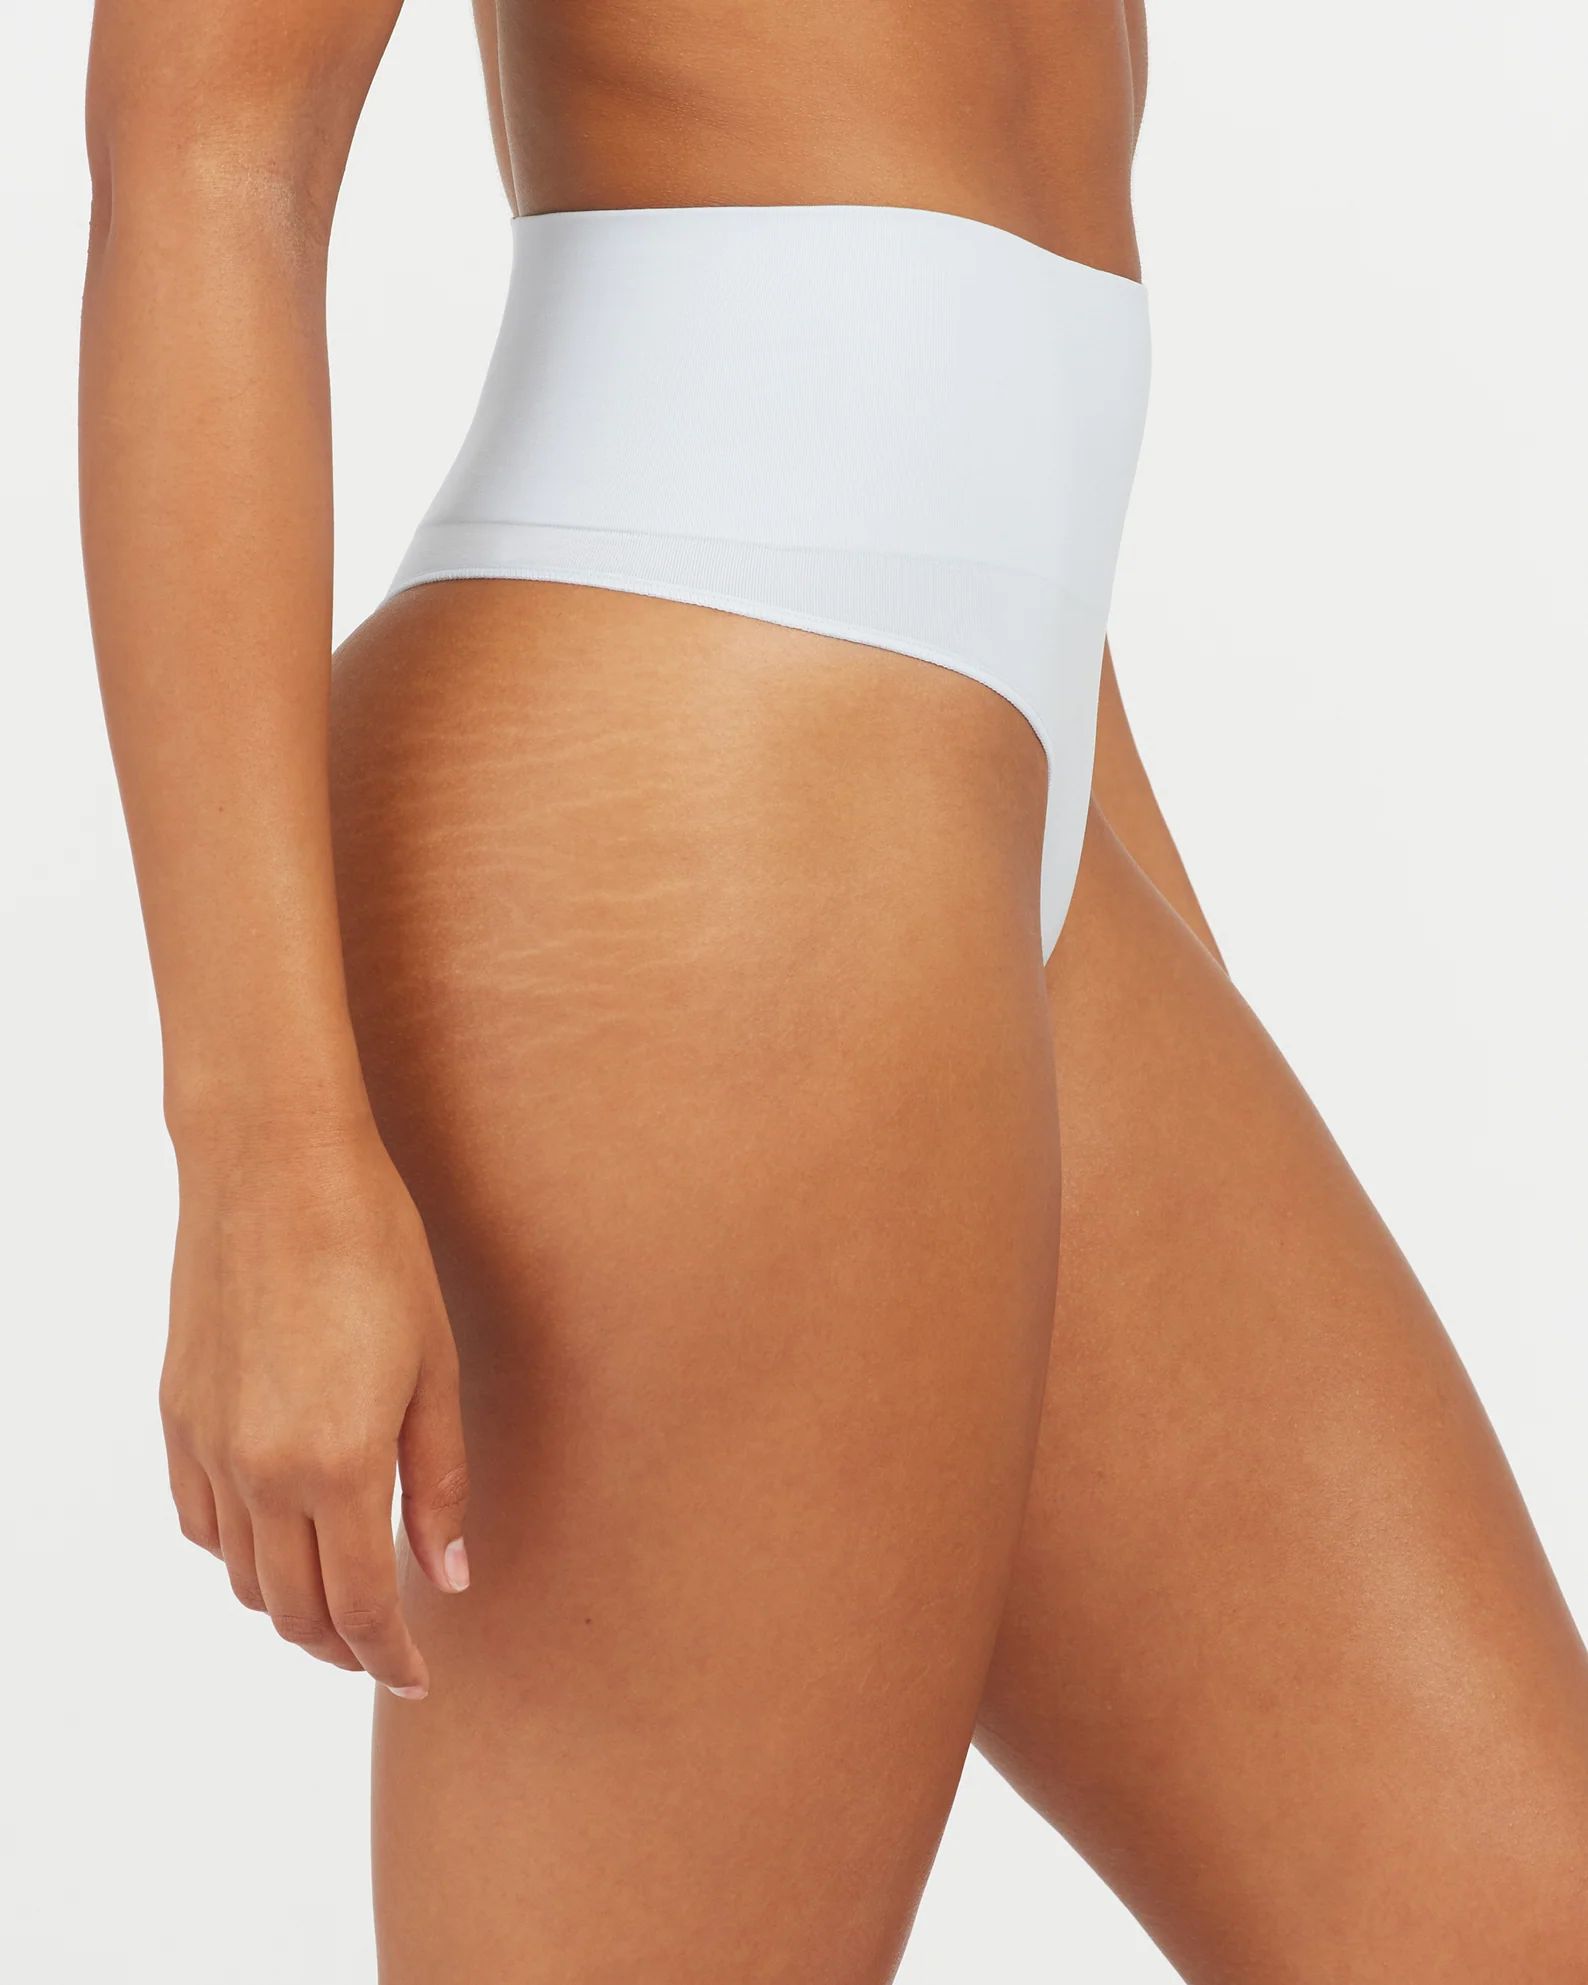 Everyday Shaping Panties Thong
       
        $22.00
        New Colors! | Spanx